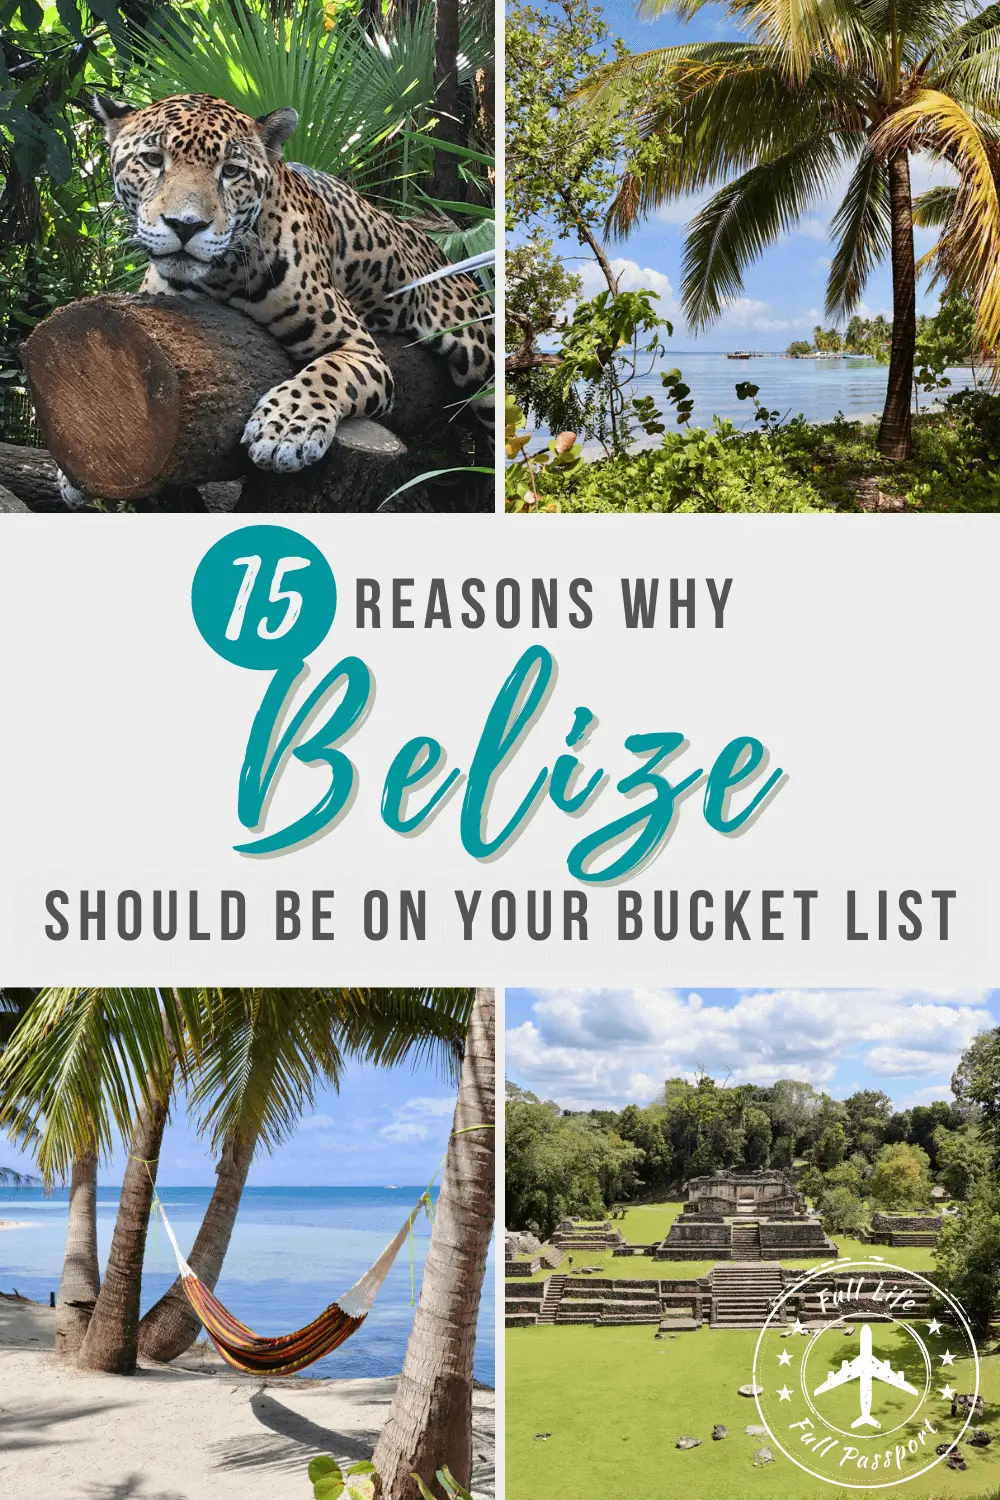 15 Reasons Why Belize Should Be on Your Bucket List